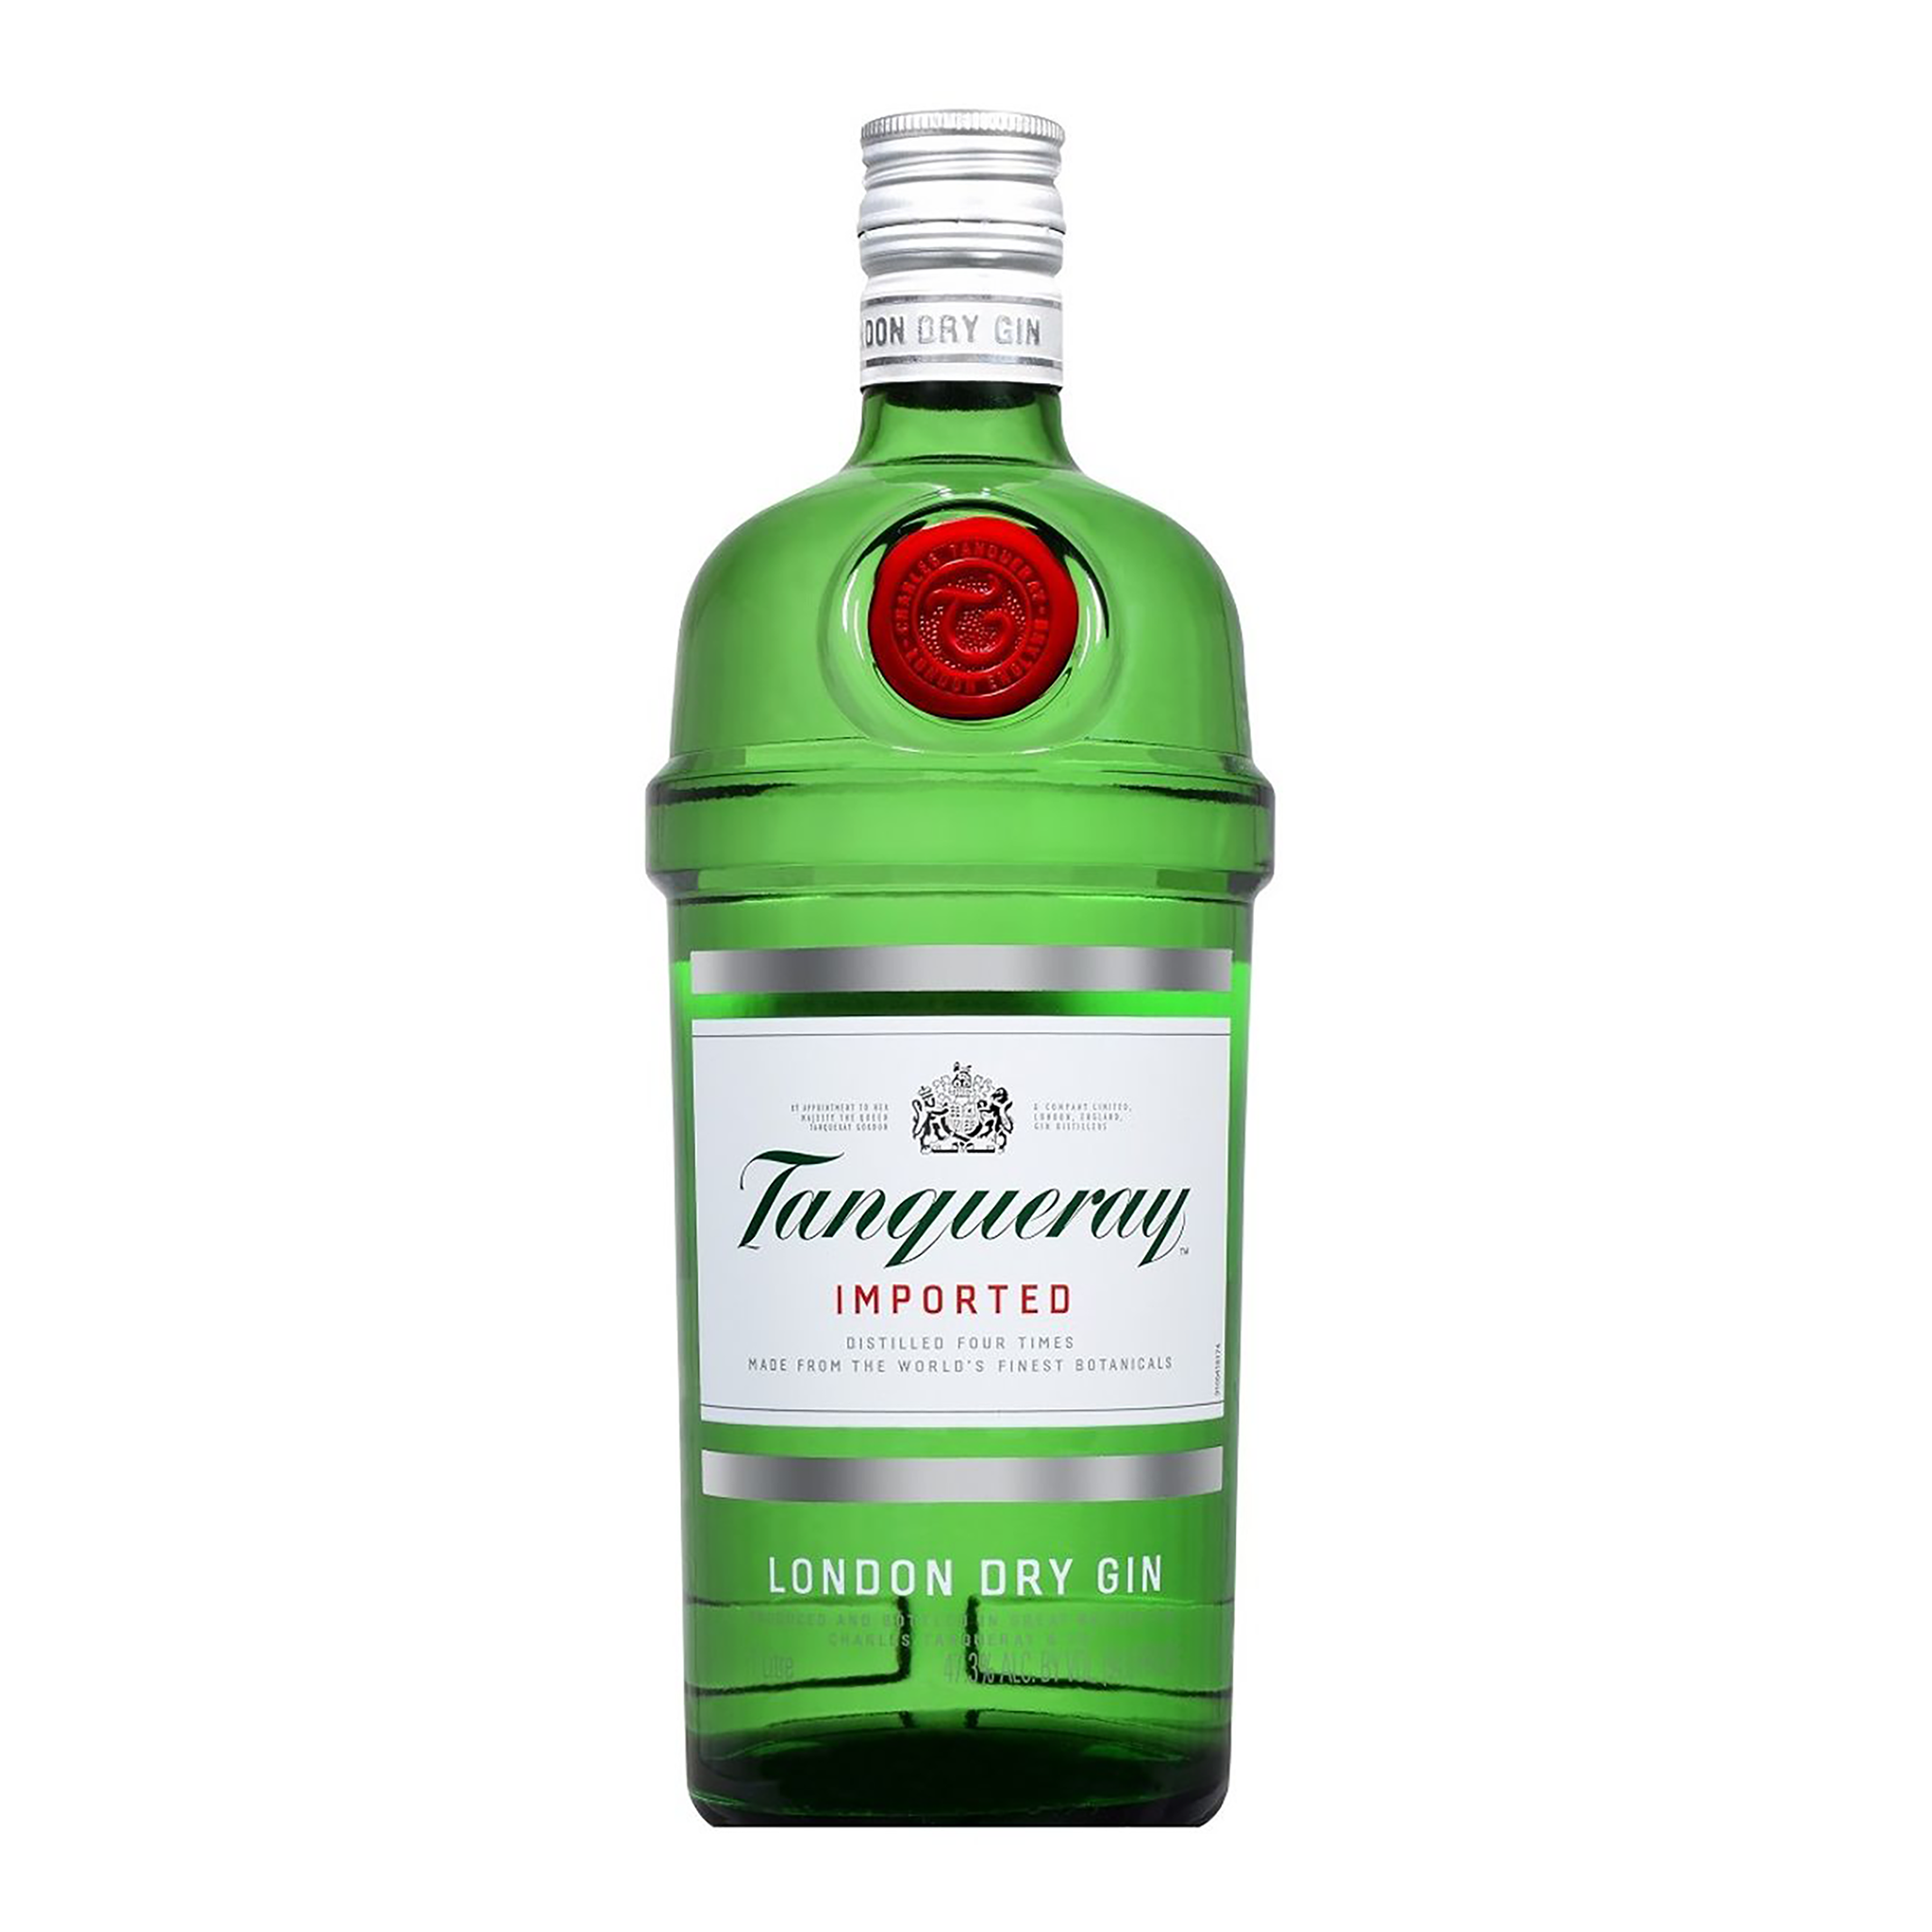 Tanqueray London Dry Gin 1L